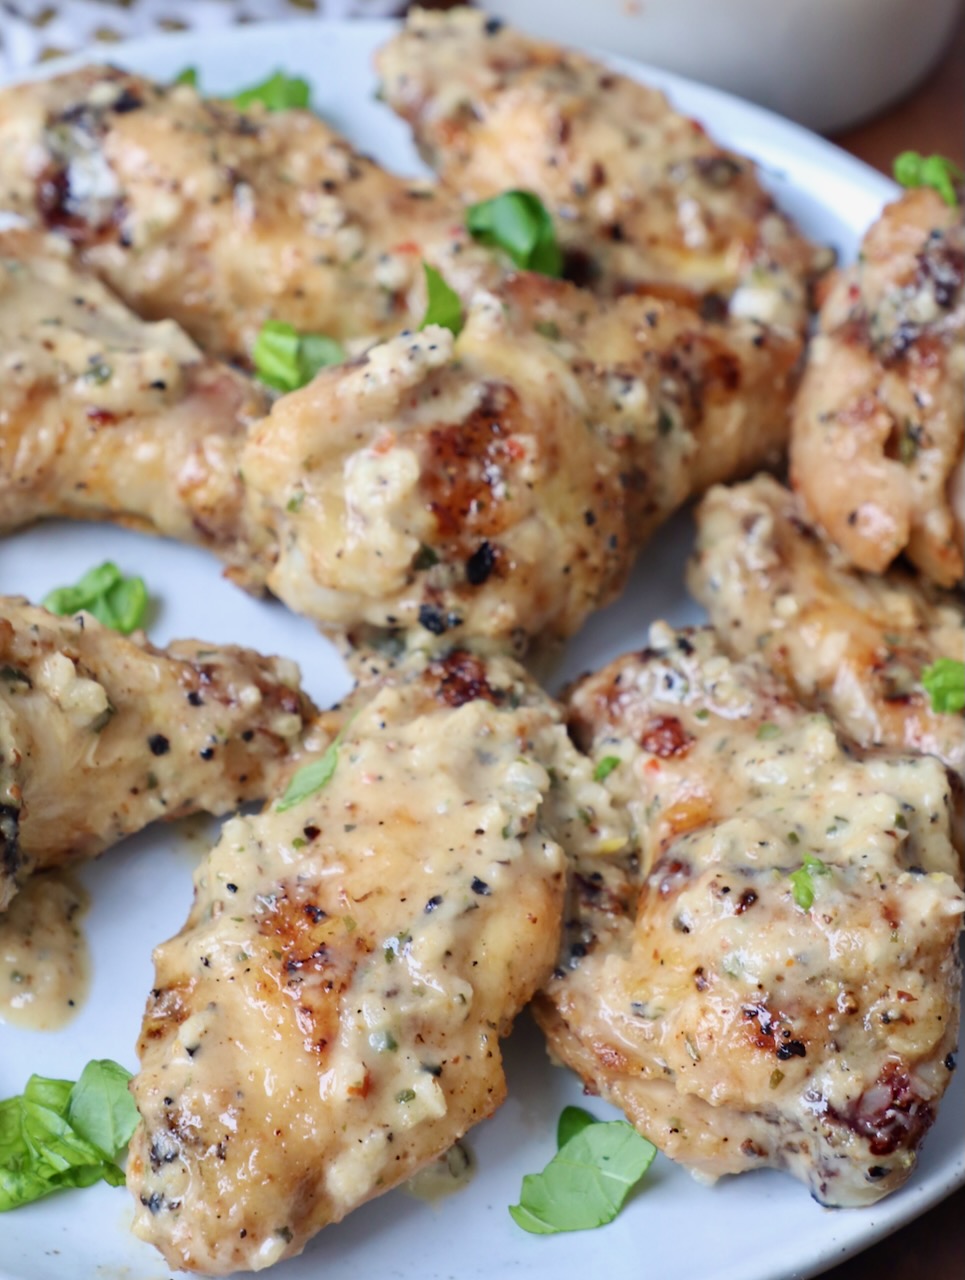 grilled chicken wings tossed in garlic parmesan sauce on plate